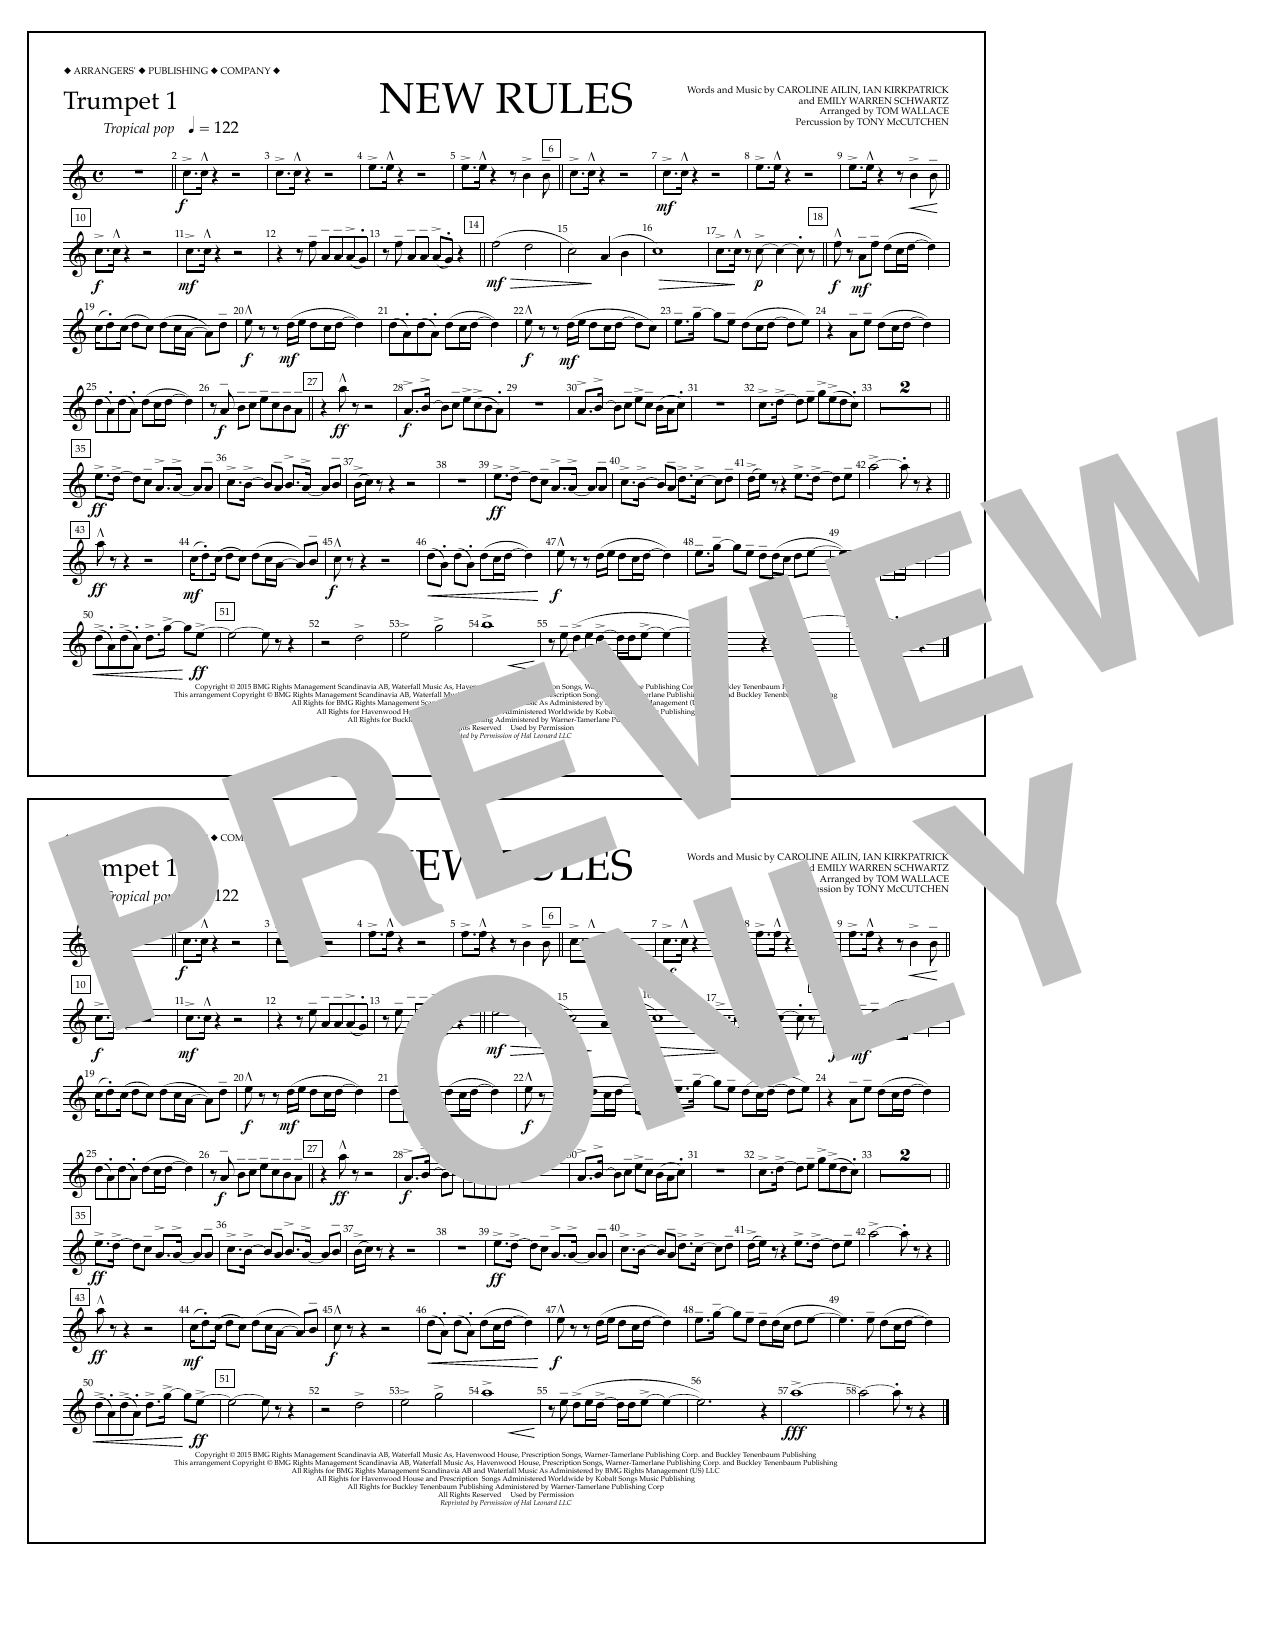 Download Tom Wallace New Rules - Trumpet 1 Sheet Music